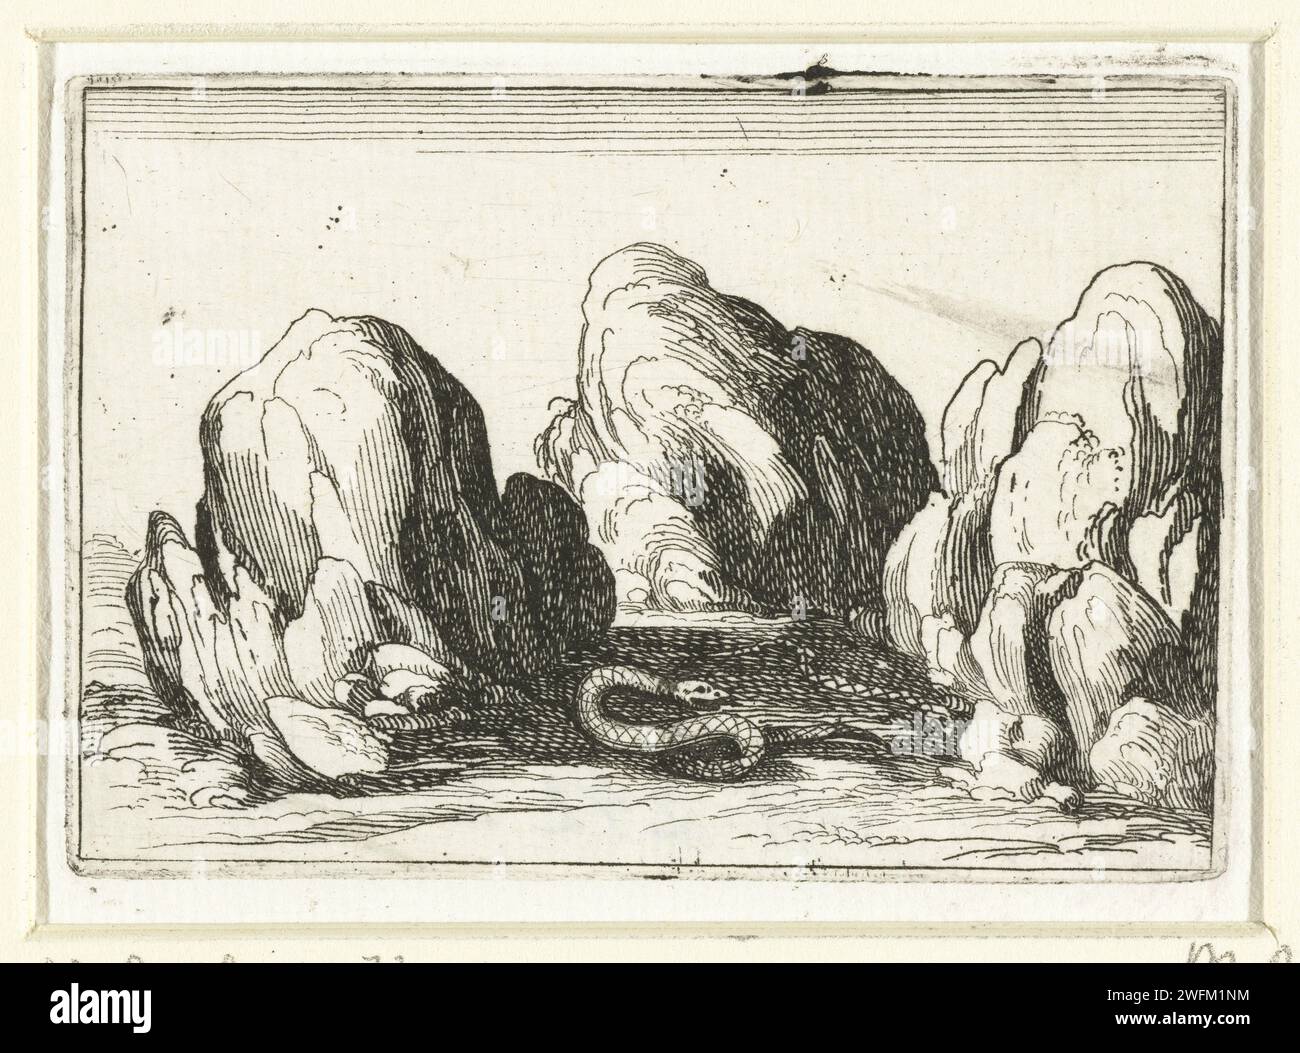 Vervellende Slang, Jacques Callot, 1621 - 1635 print Presentation of a snake between the rocks; The old sheet of which he has just stripped is right next to him. This magazine is part of the emblem series 'Monastic Life in Emblemen'. In addition to an illustrated title page and 26 emblems, the second state of this series is a title page and a magazine with assignment, both in book print without image. Nancy paper etching snakes. animals (+ shedding of skin of animal(s)) Stock Photo